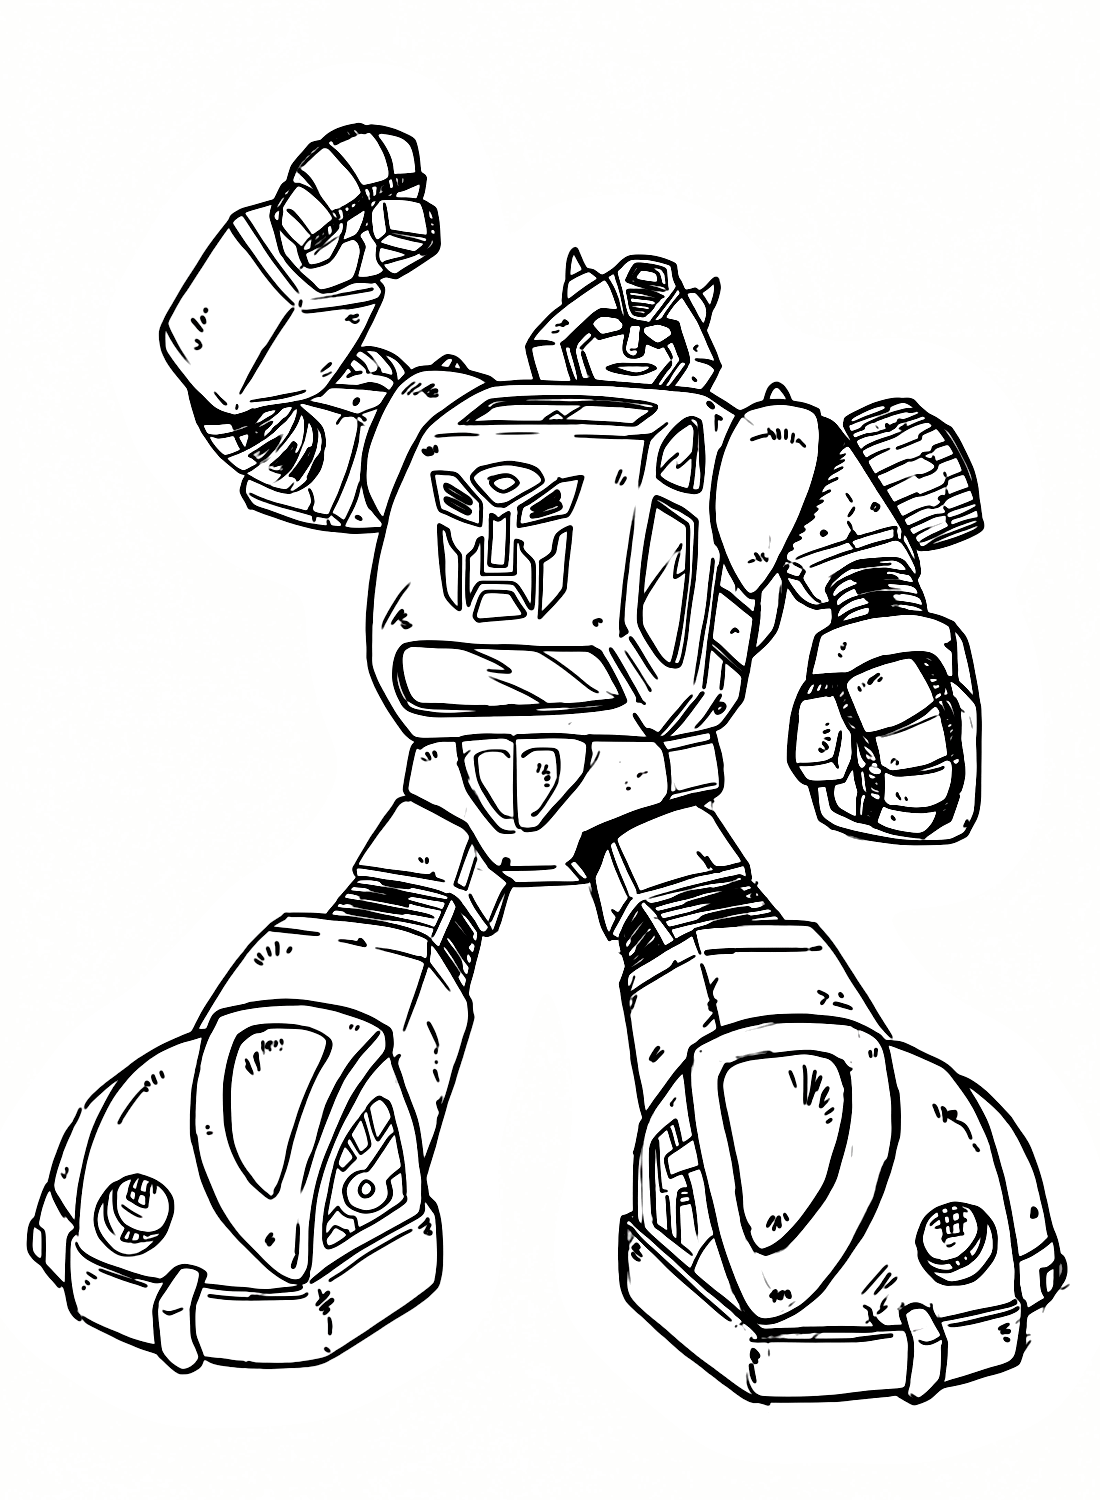 Free Bumblebee Coloring Sheet from Bumblebee